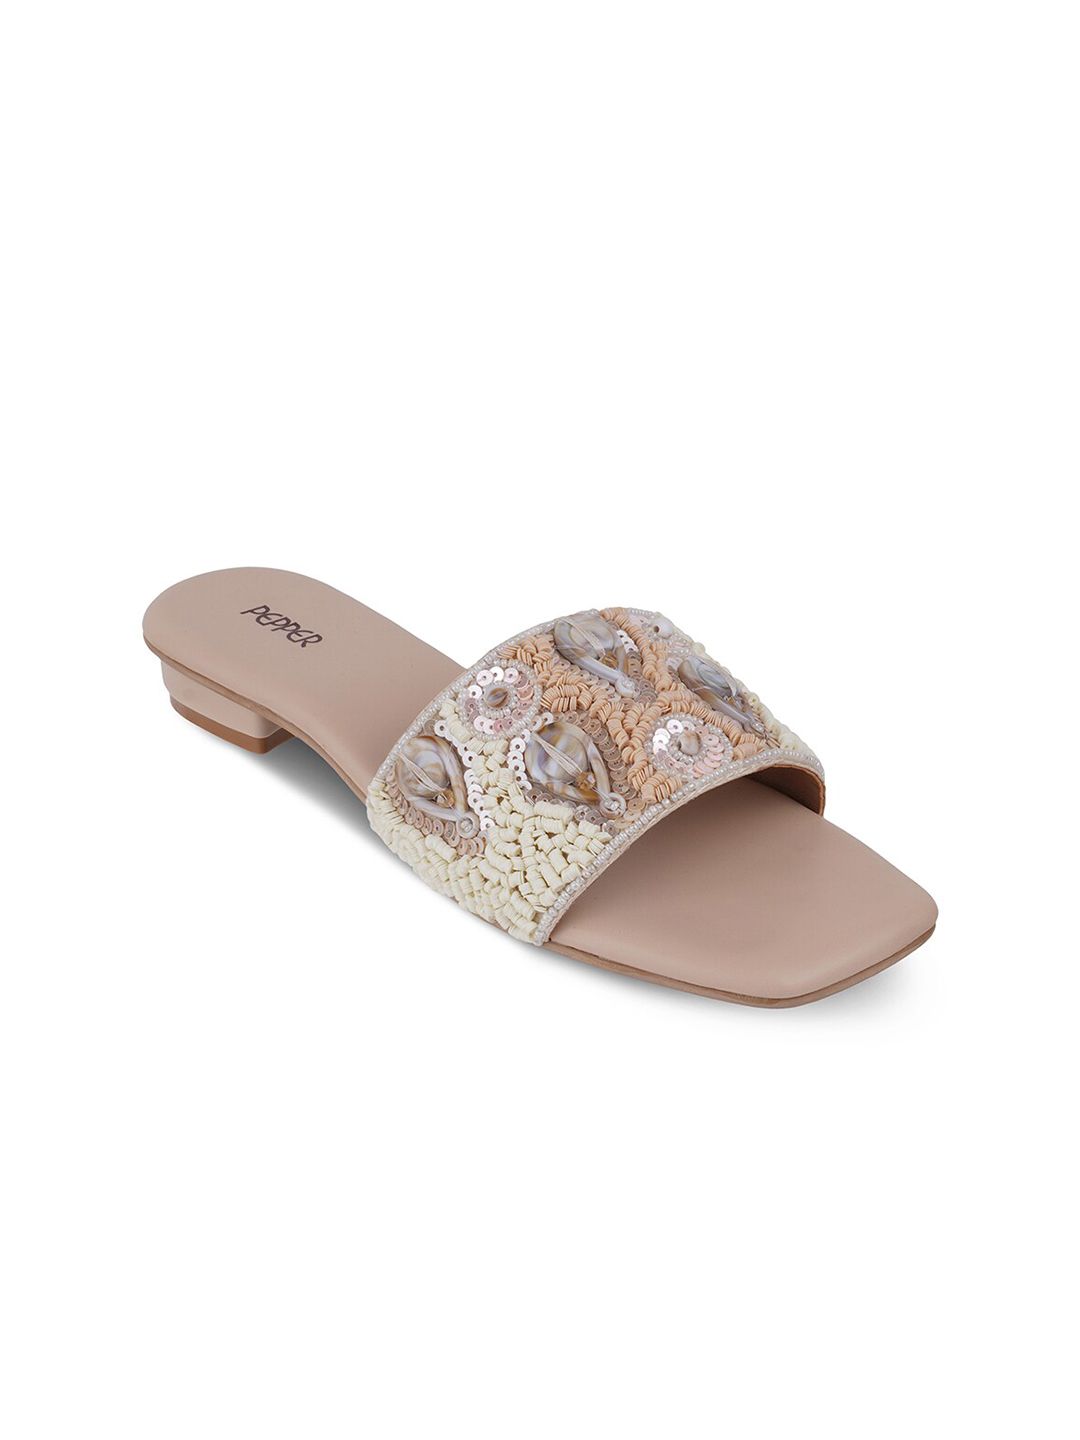 PEPPER Embellished Open Toe Flats Price in India